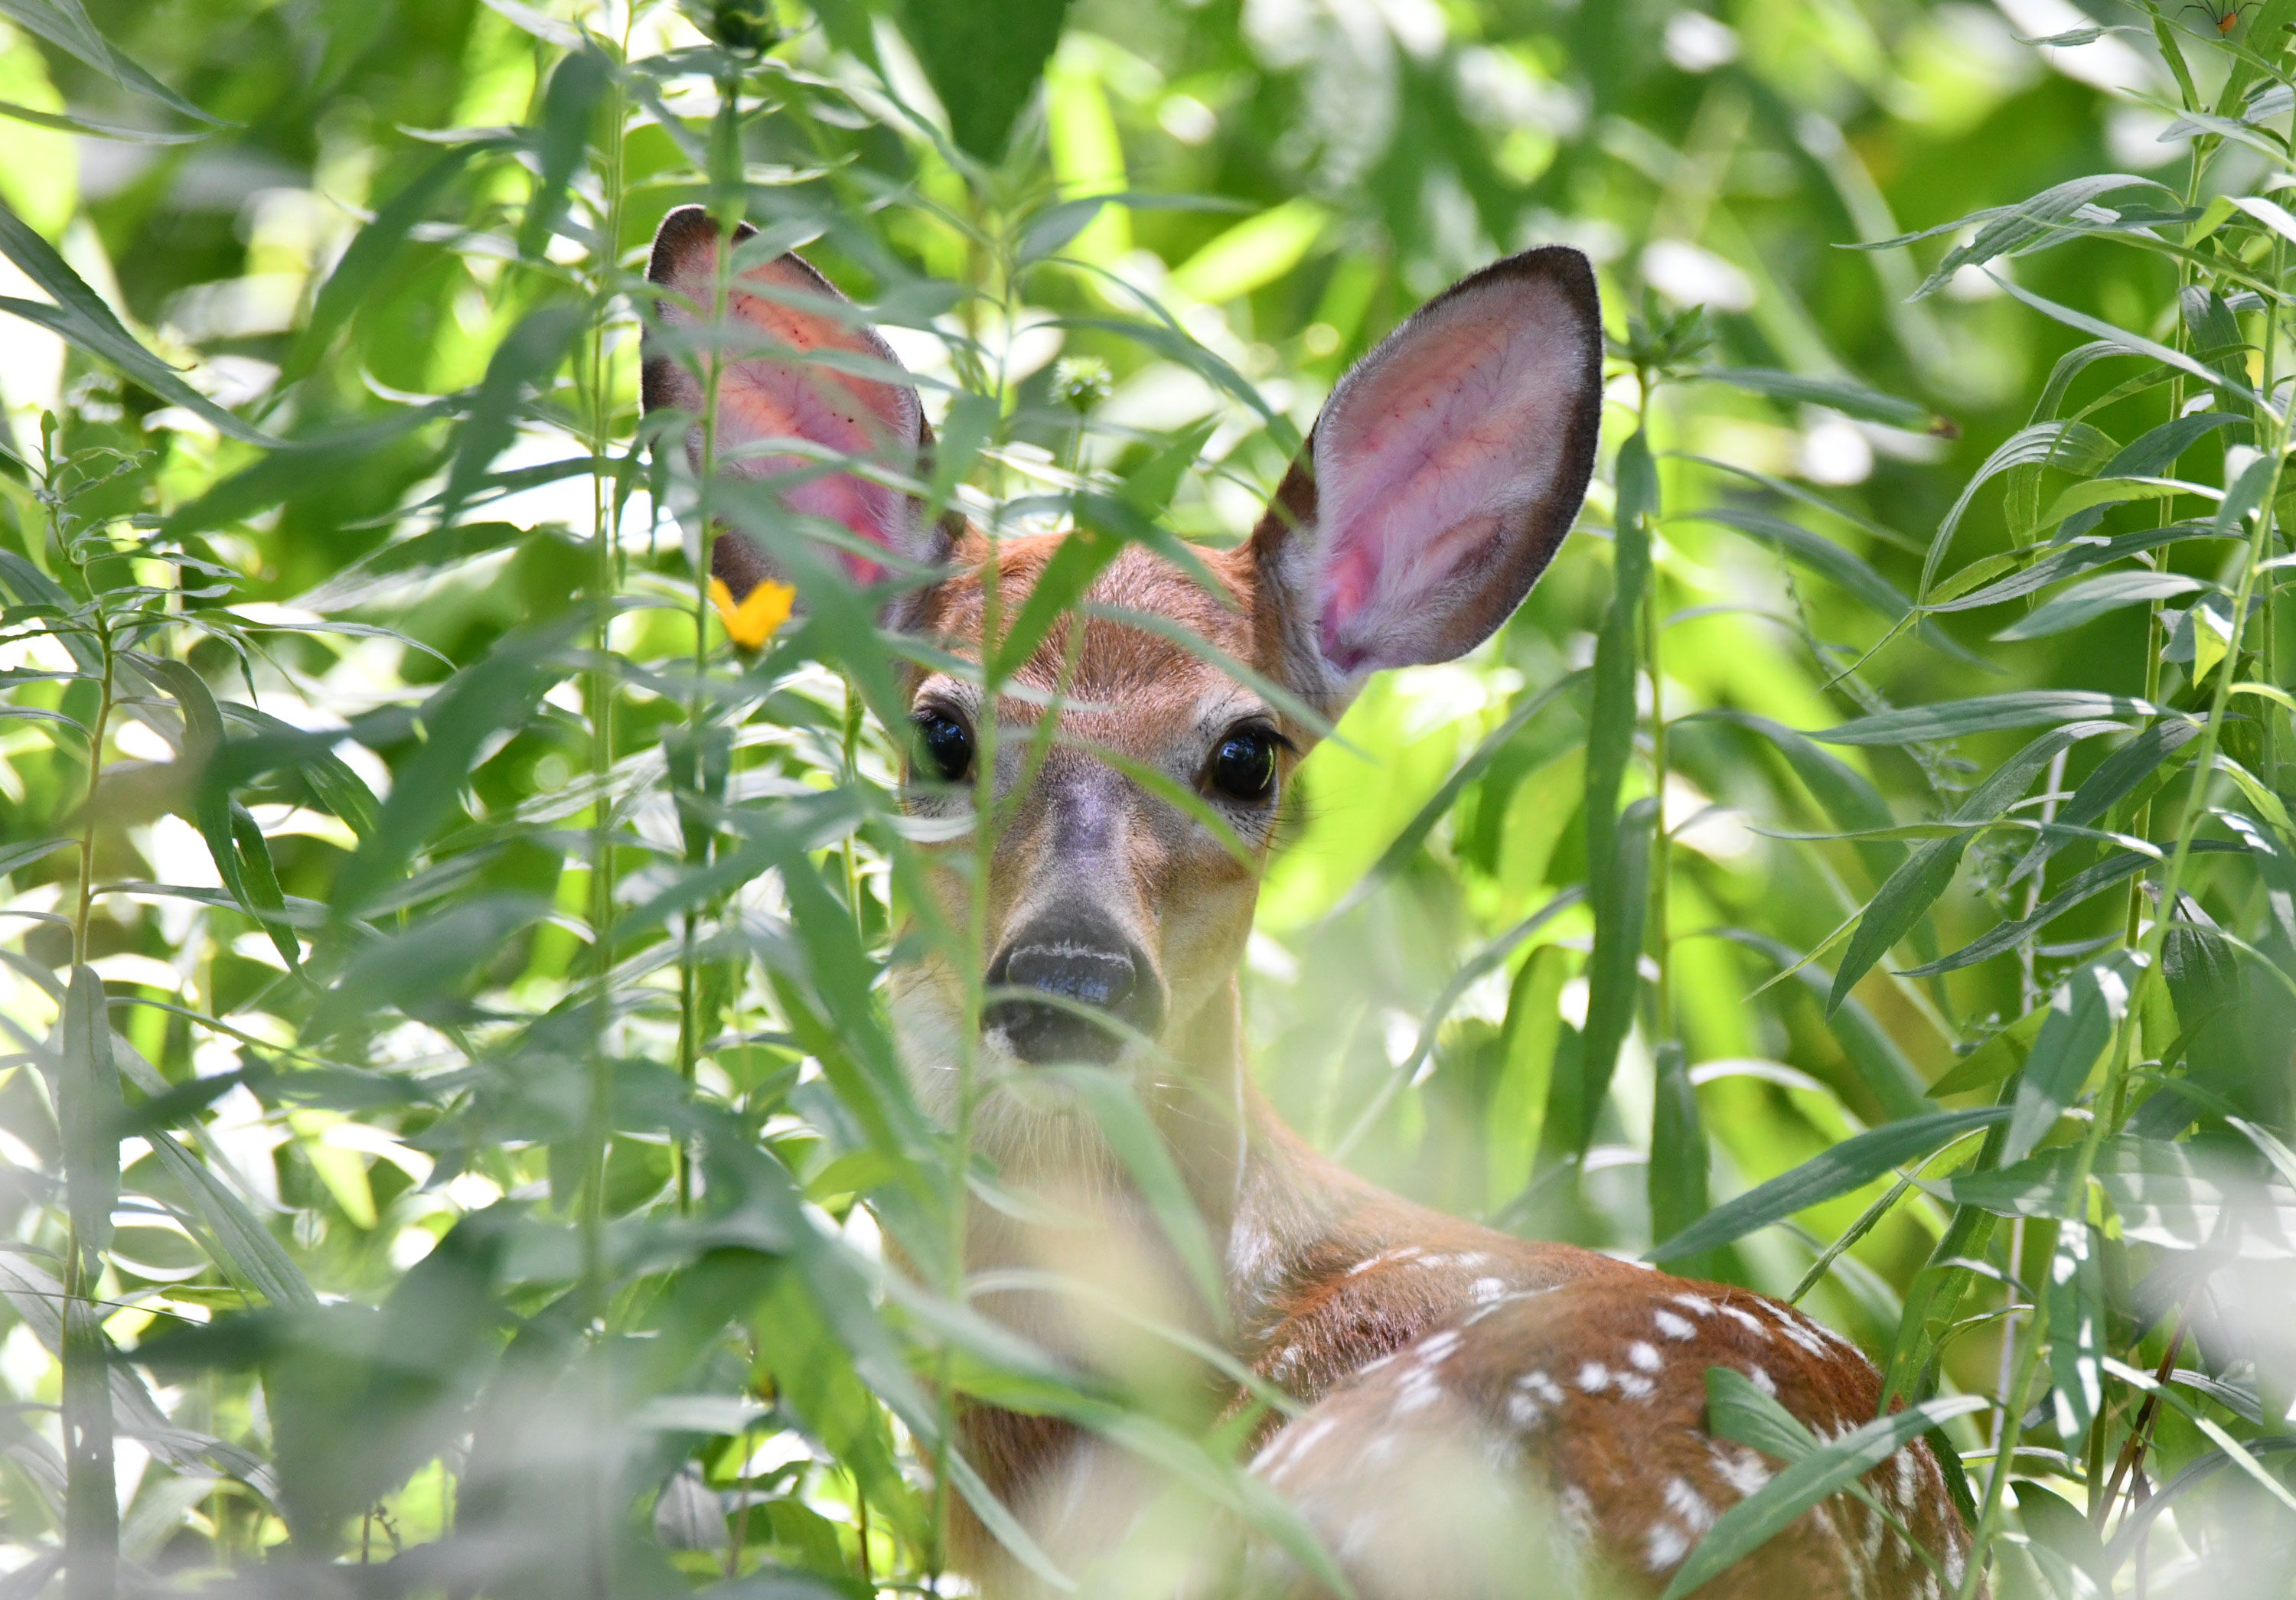 A fawn laying in vegetation.